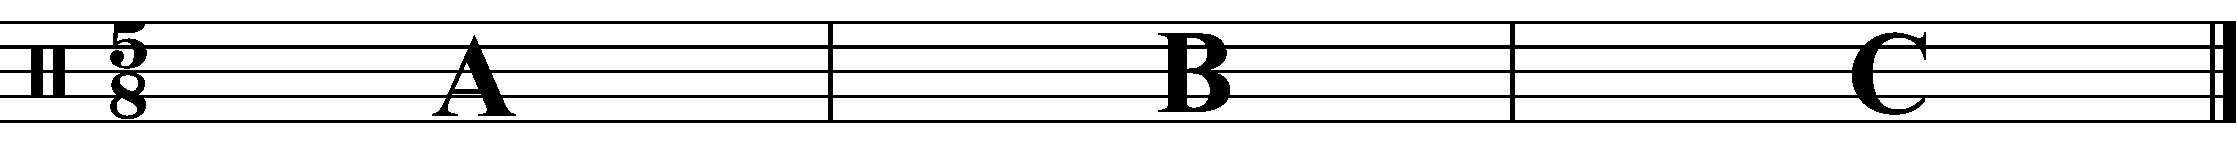 A three bar phrase made up of 3 different sections in the time signature of 6/8.